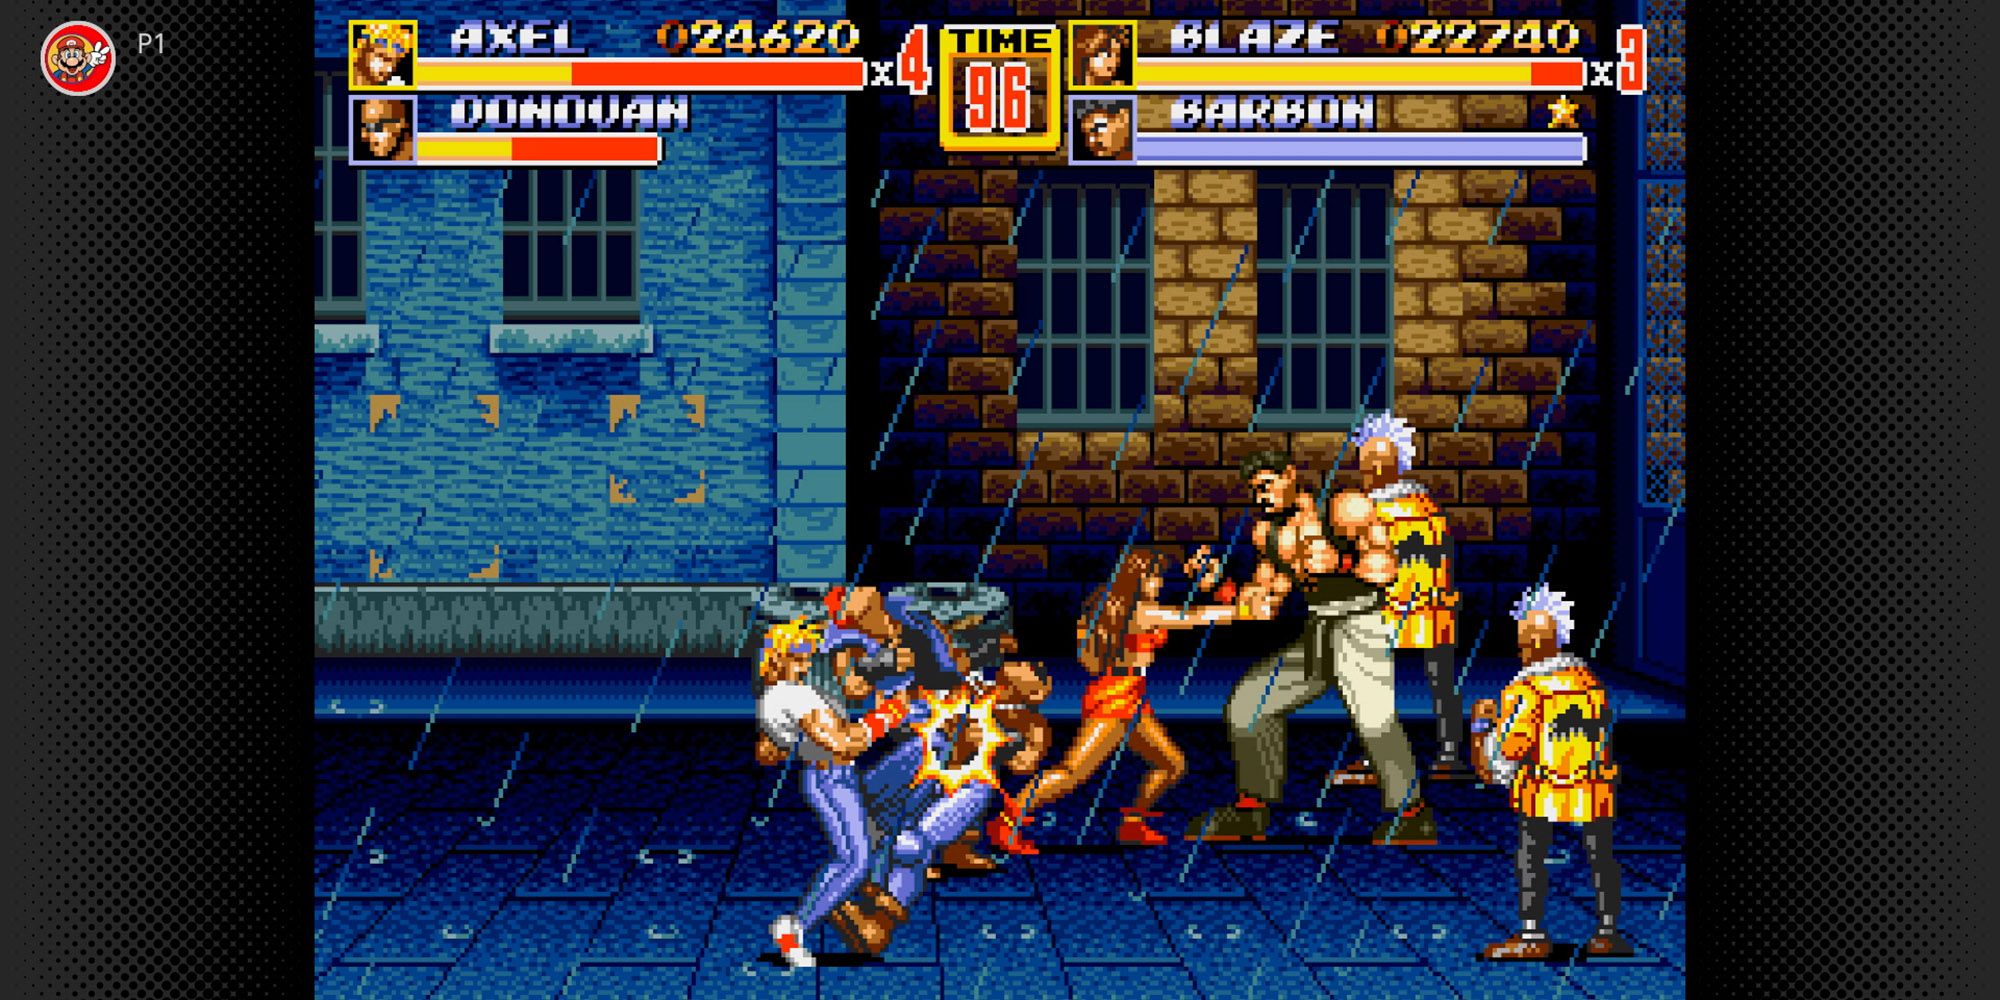 Punch faces in Streets of Rage